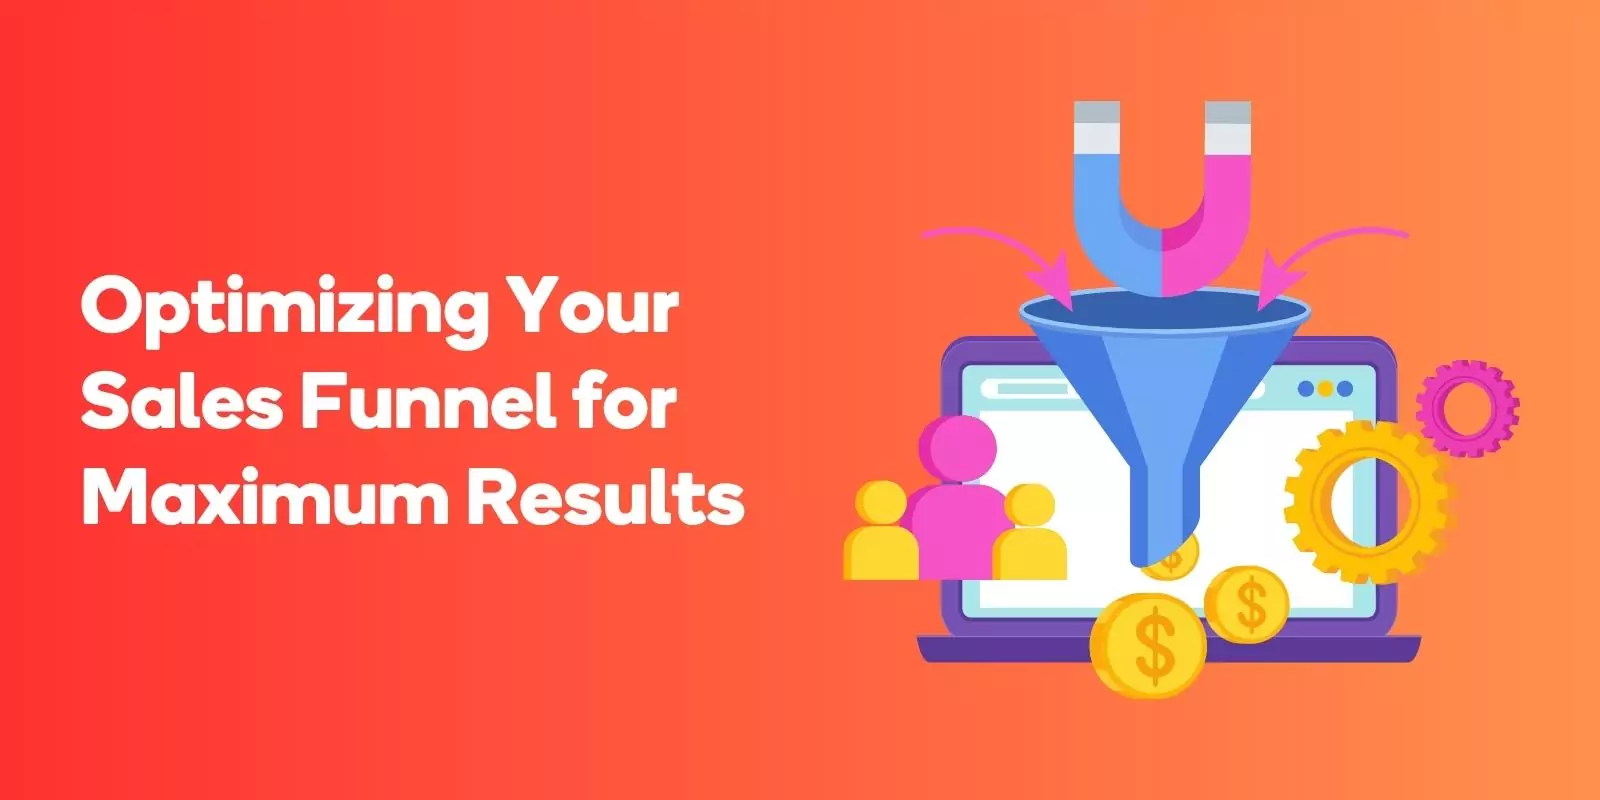 Optimizing Your Sales Funnel for Maximum Results